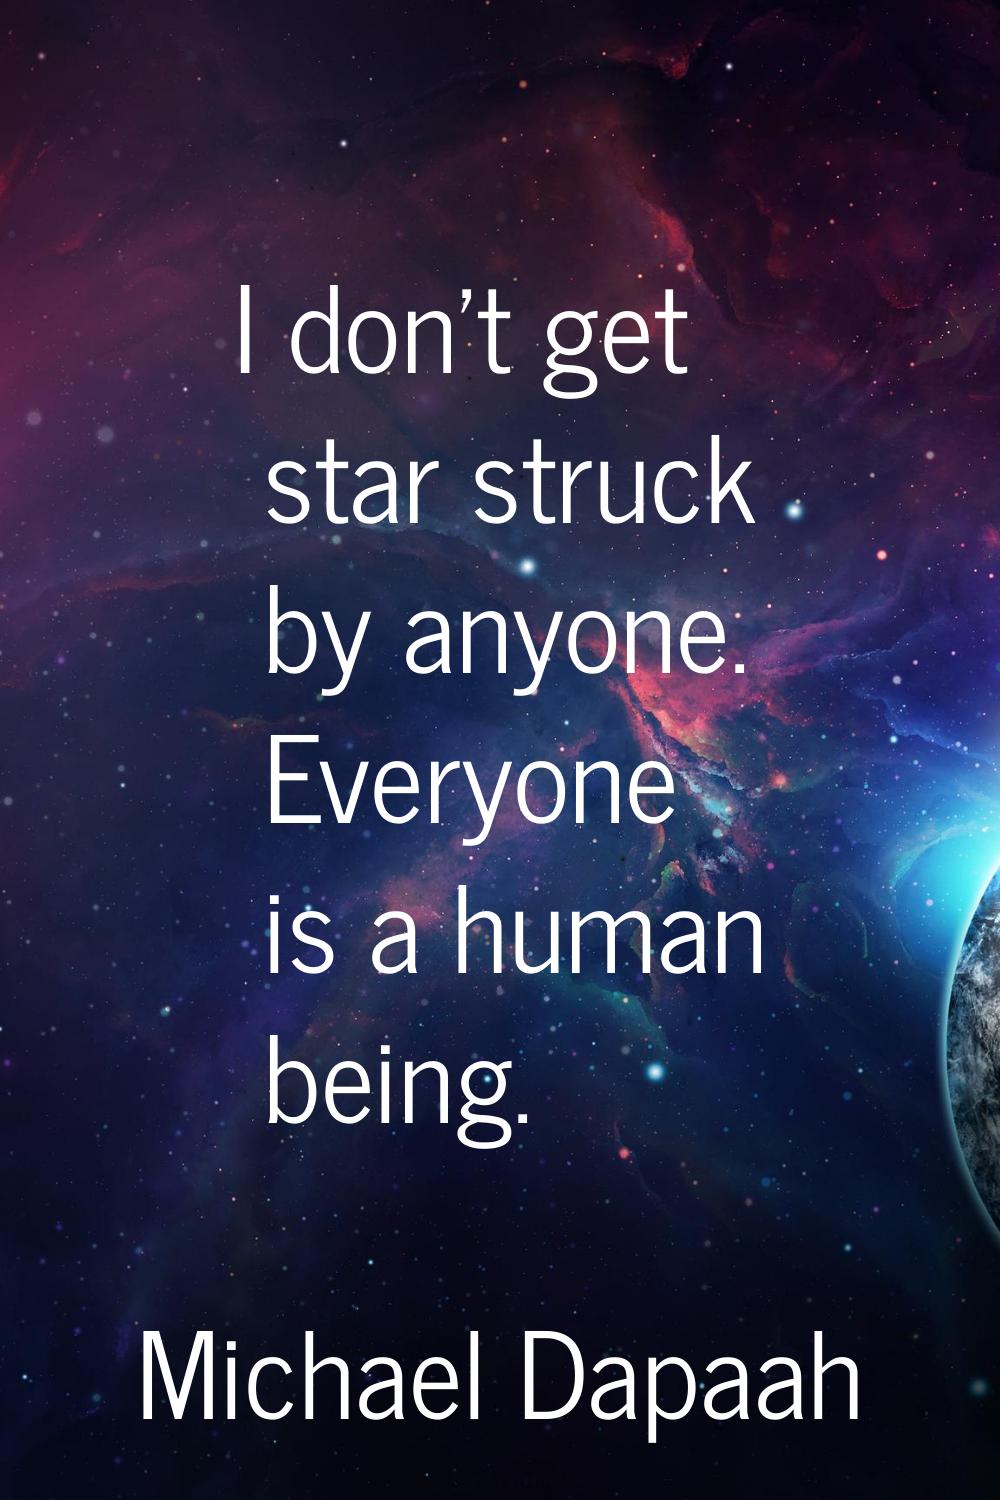 I don't get star struck by anyone. Everyone is a human being.